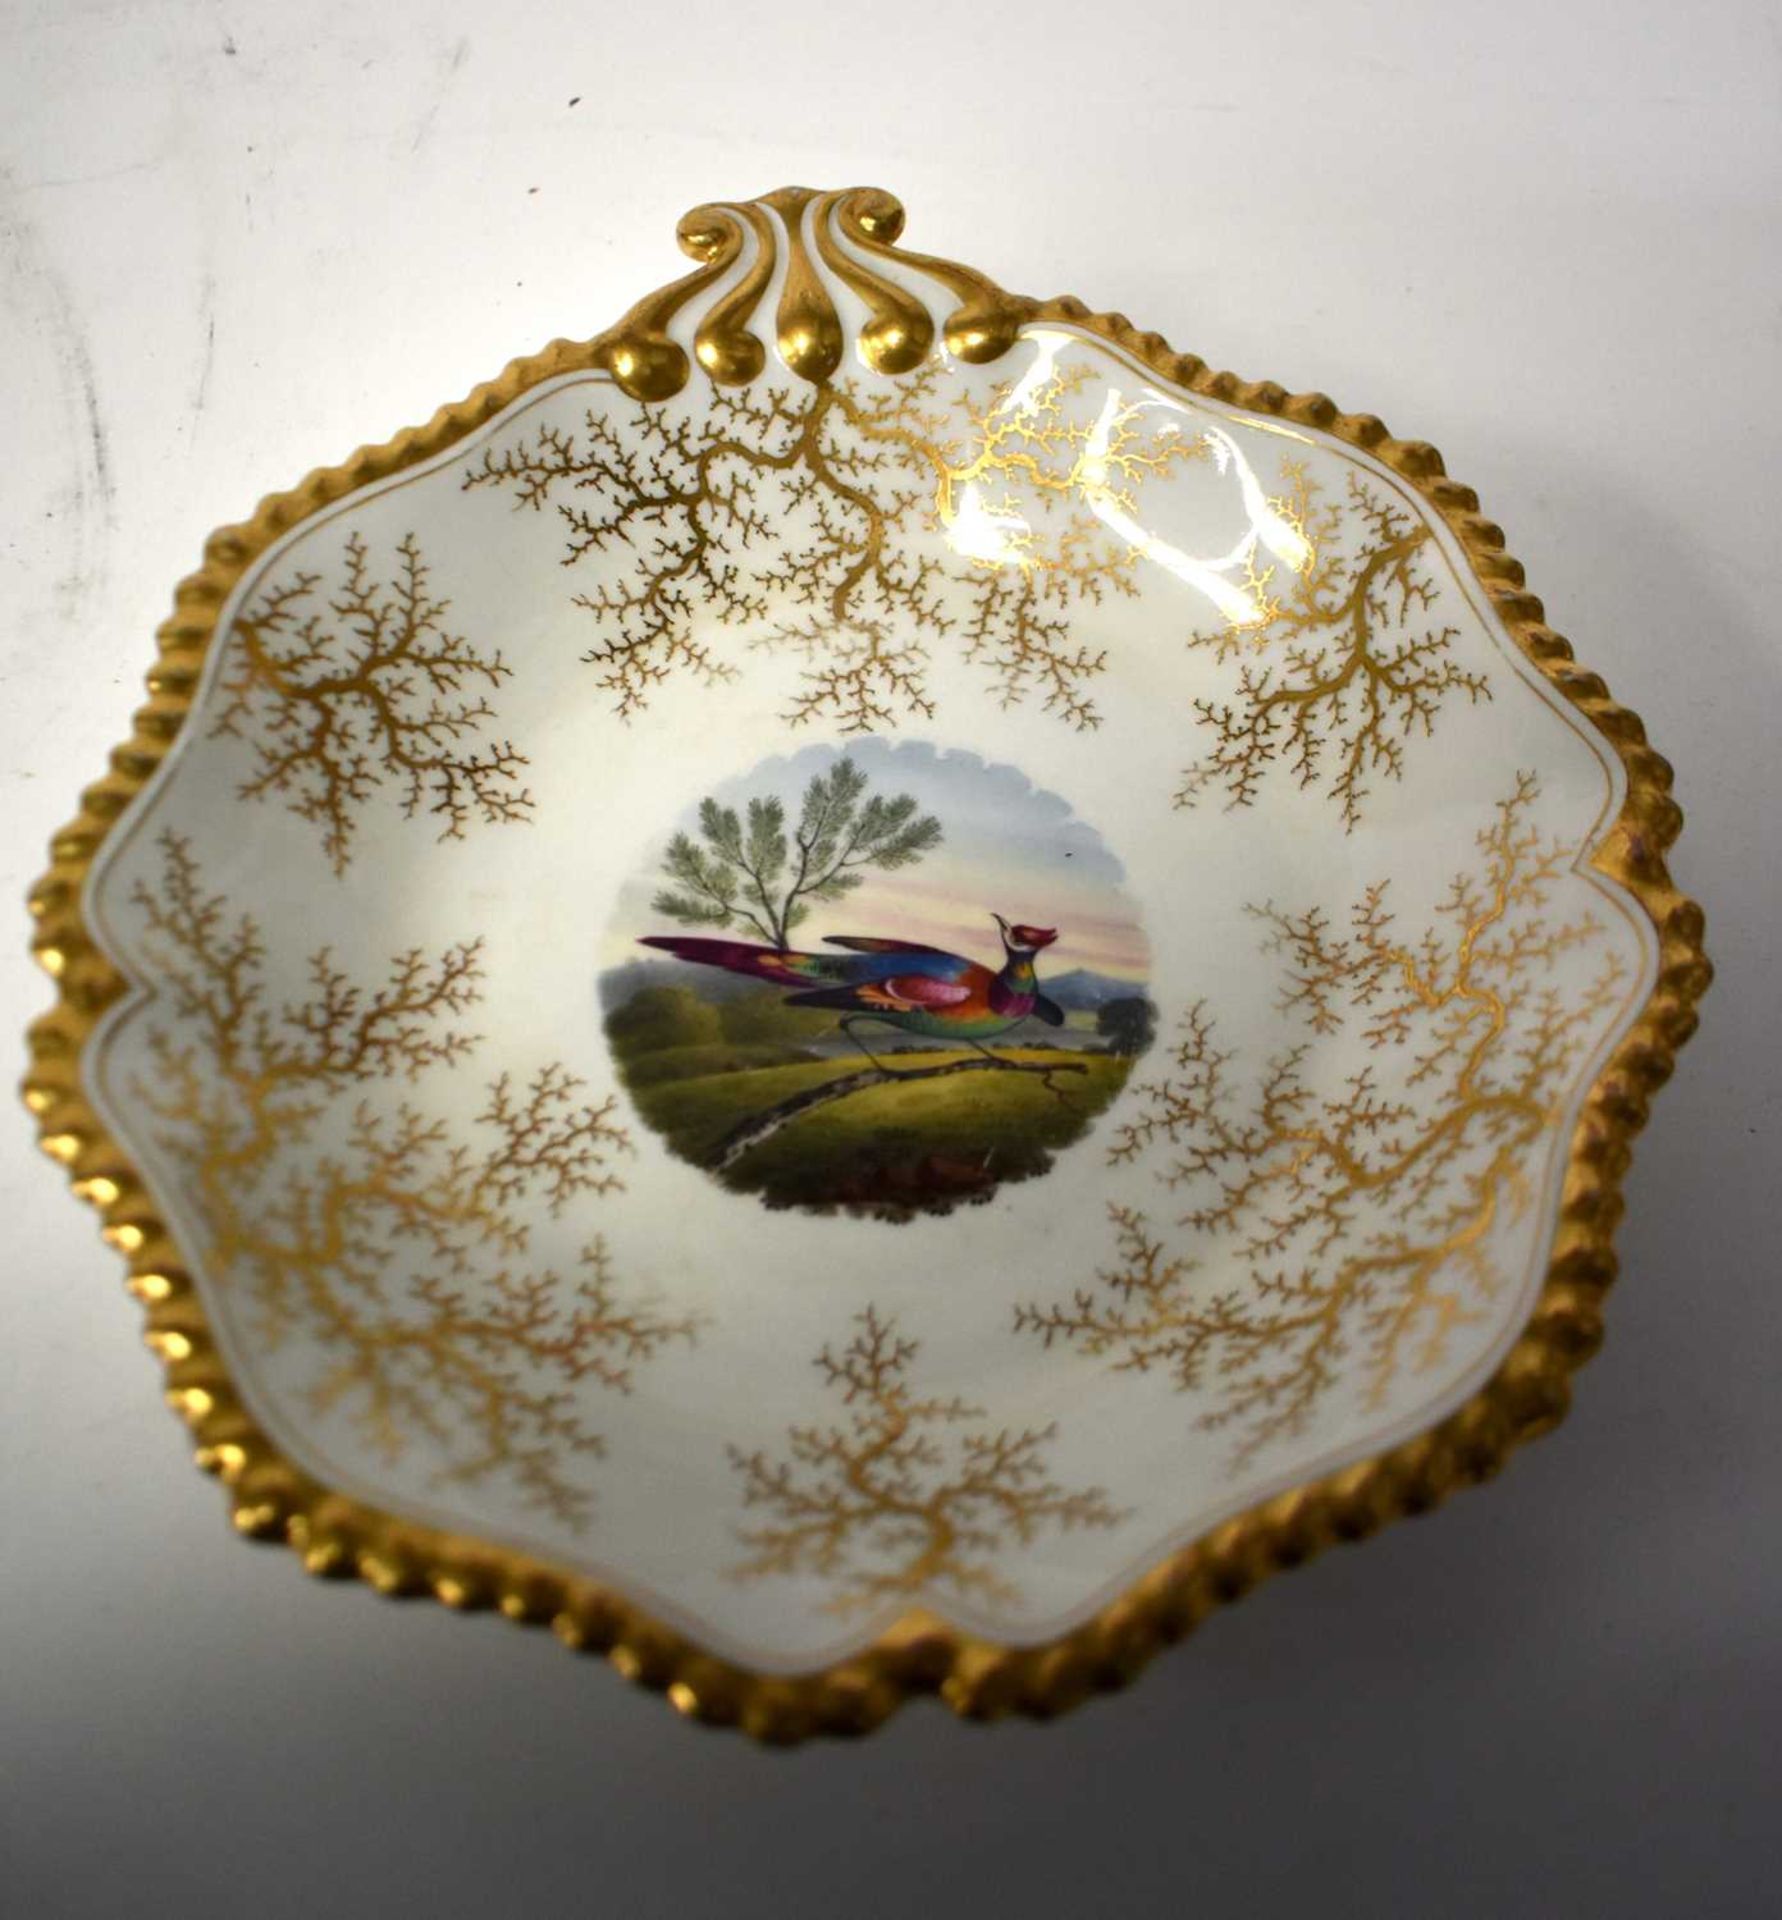 A FINE EARLY 19TH CENTURY FLIGHT BARR AND BARR WORCESTER DESSERT SERVICE painted with landscapes and - Image 25 of 32